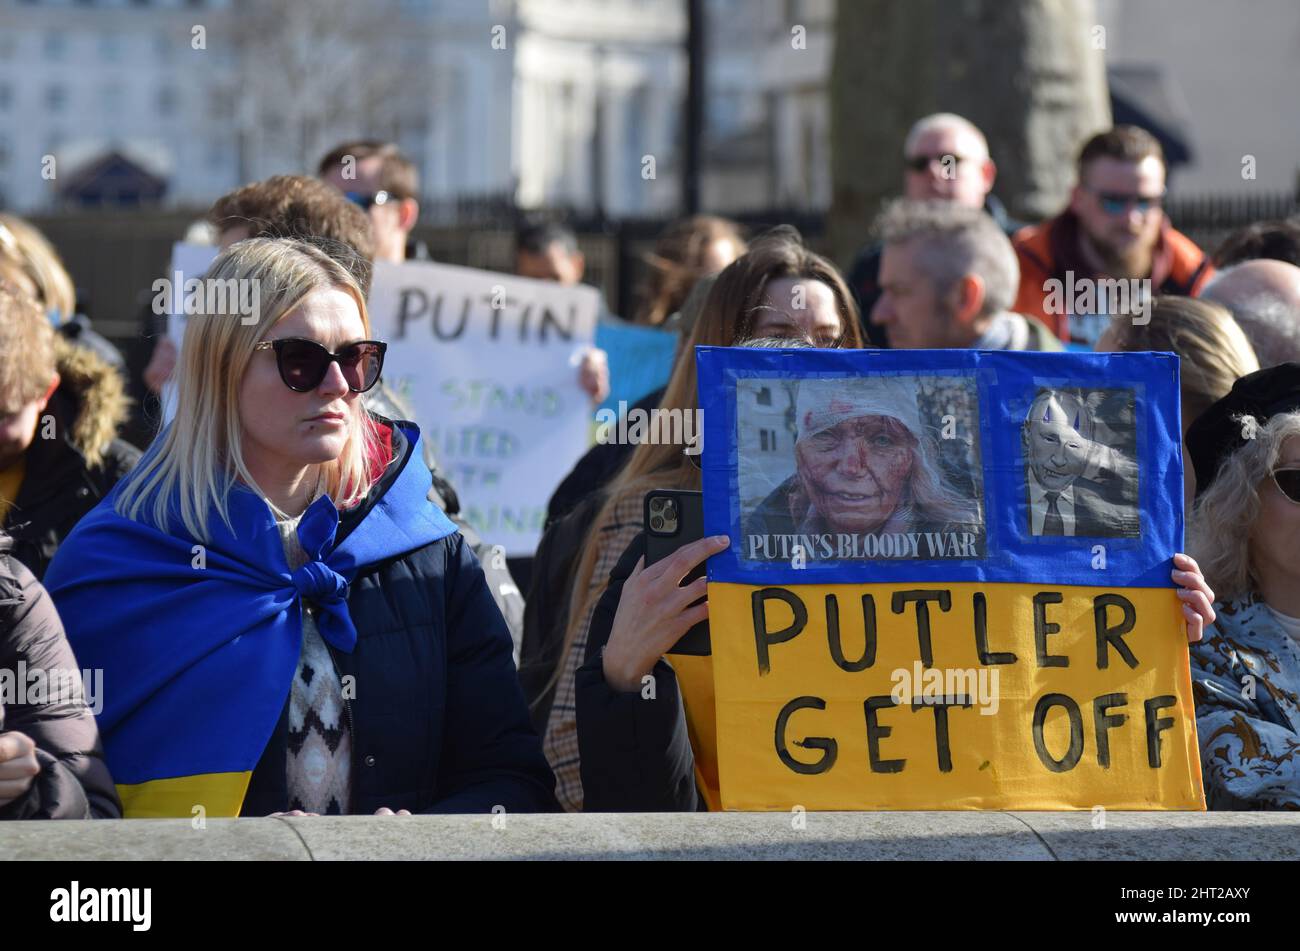 Scenes from the protests against the Russian Invasion of Ukraine in London on February 26 2022 where thousands turned out in solidarity of Ukraine Stock Photo